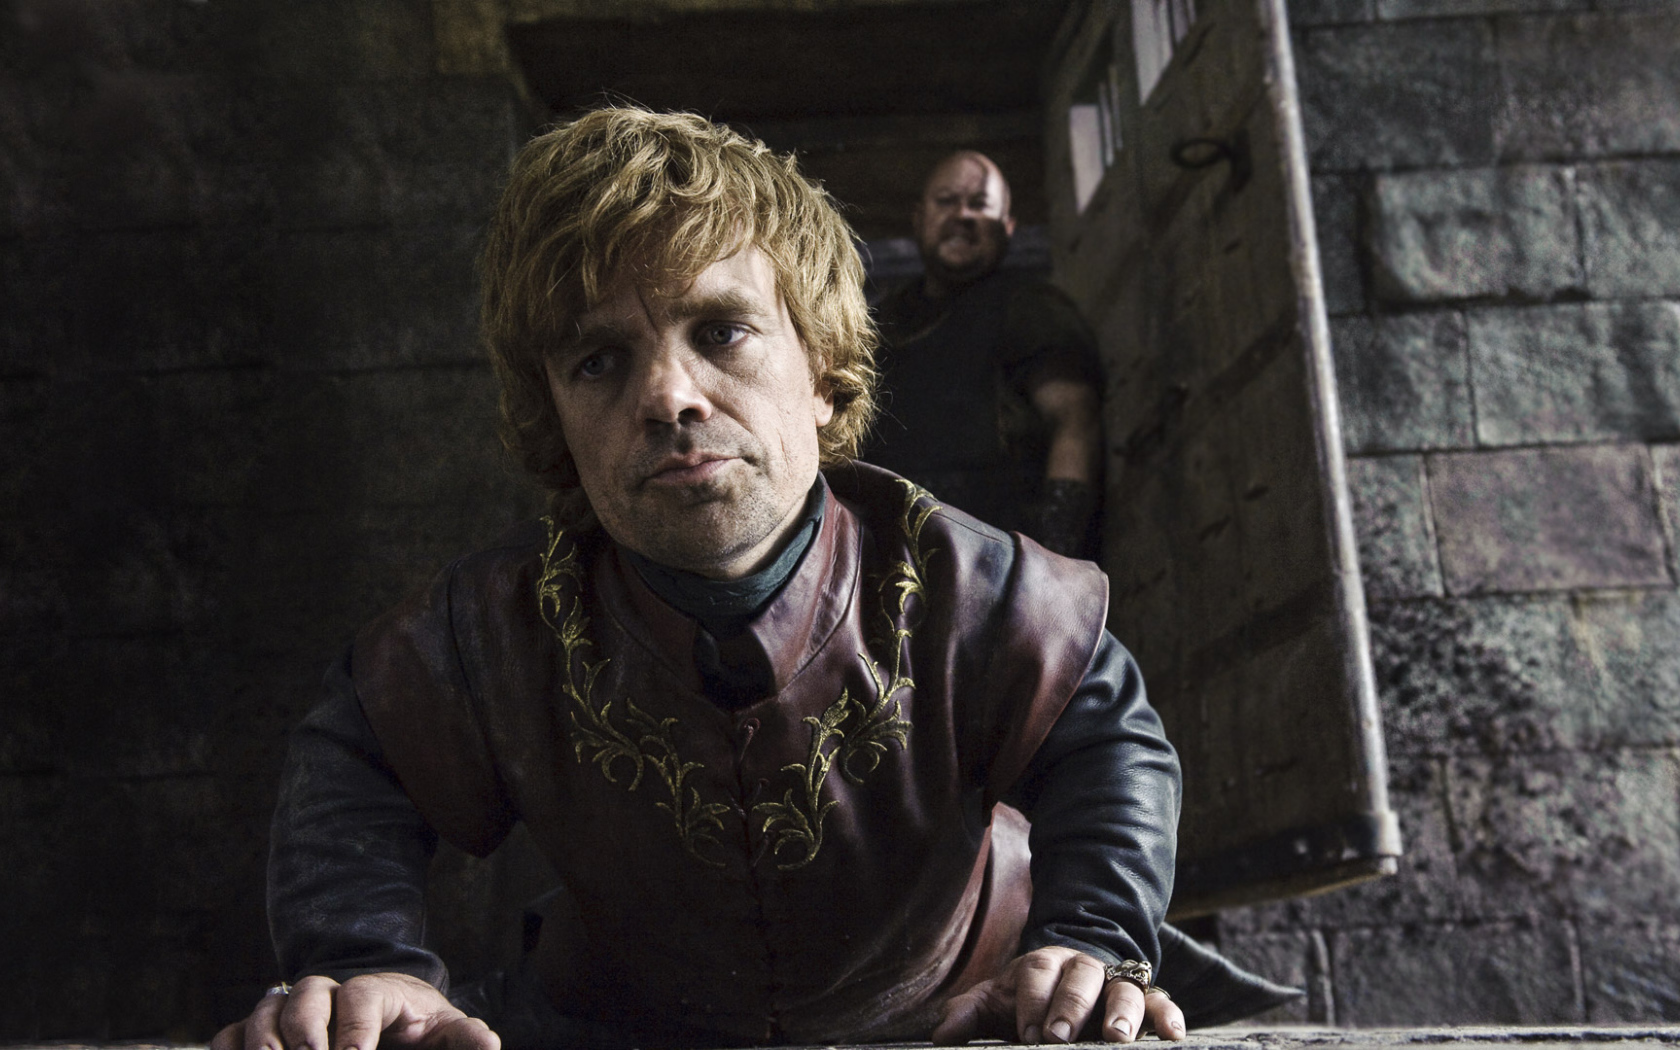 Tyrion Lannister from Game of Thrones TV series